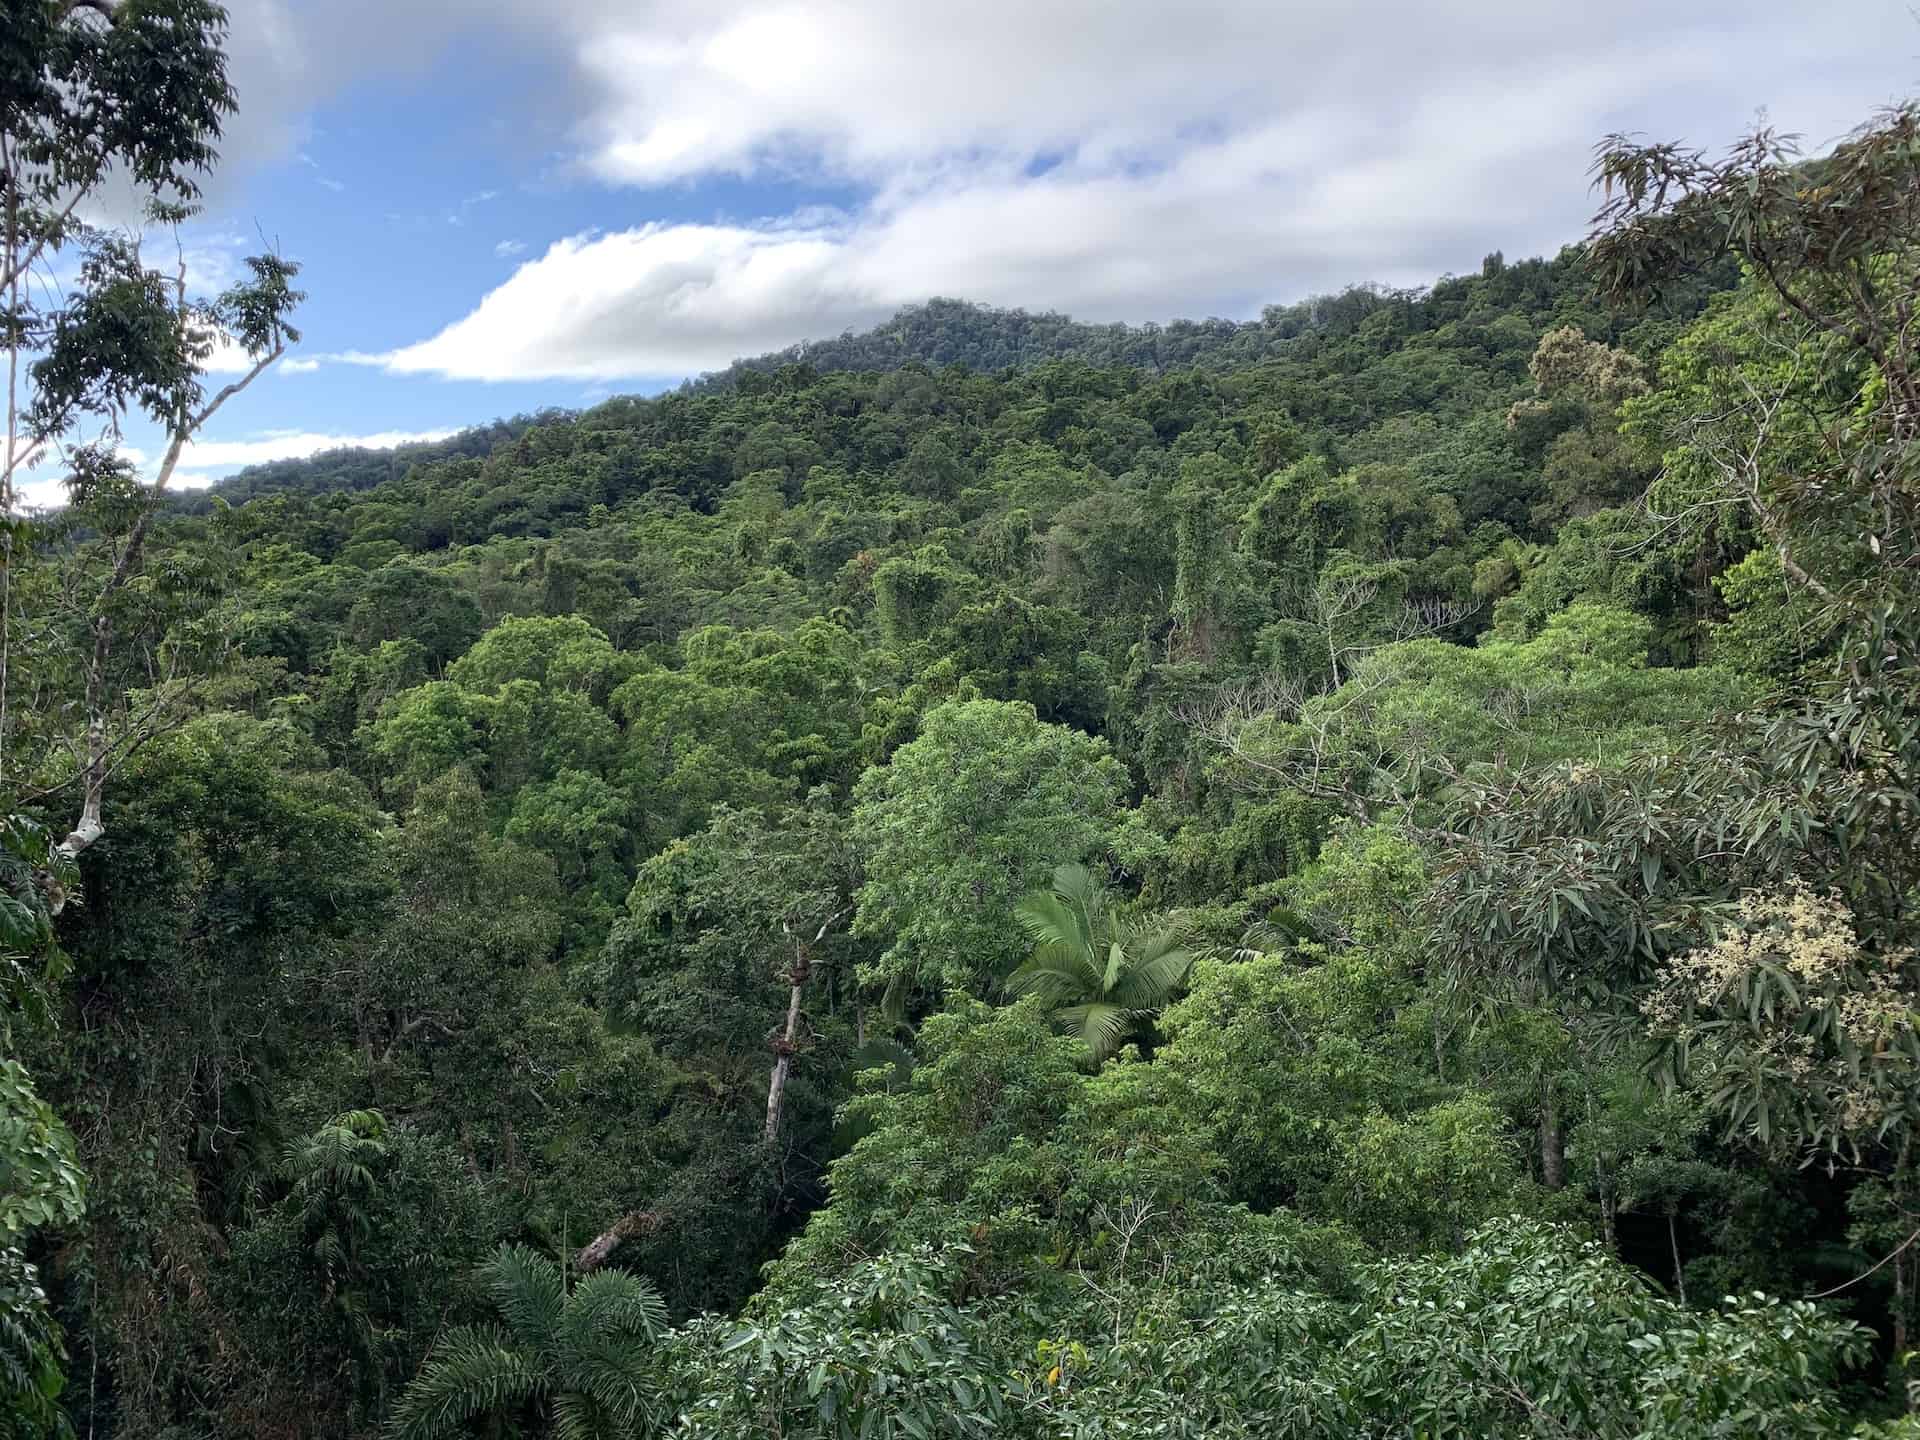 A Complete Overview of the Daintree Discovery Centre